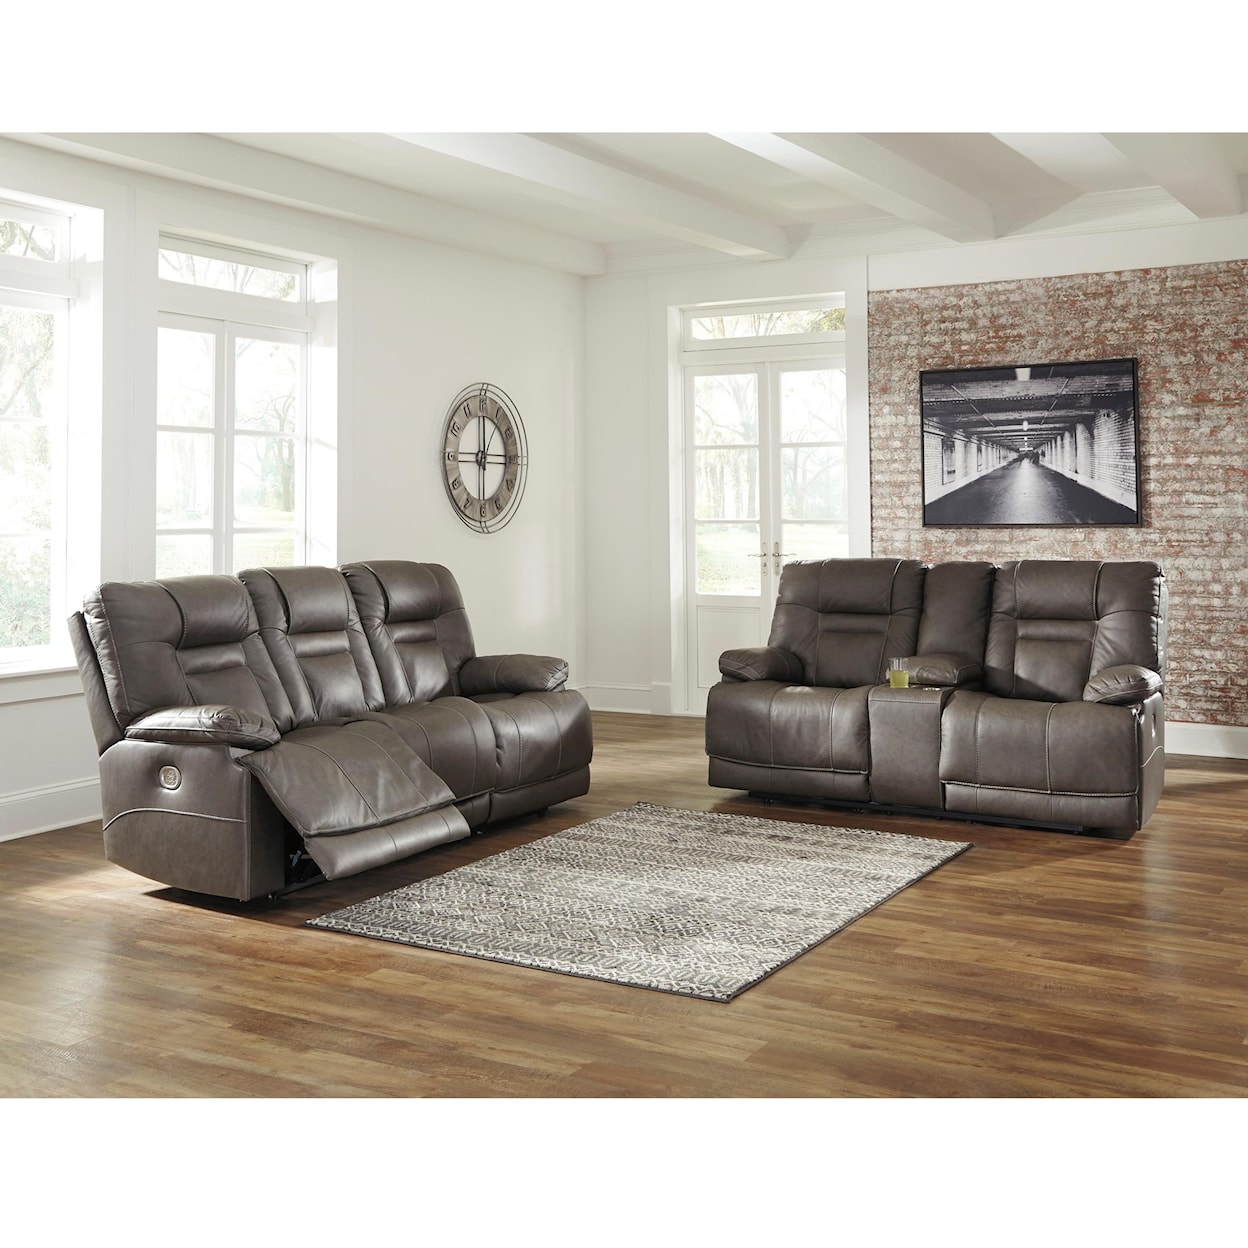 Signature Design by Ashley Wurstrow Reclining Living Room Group